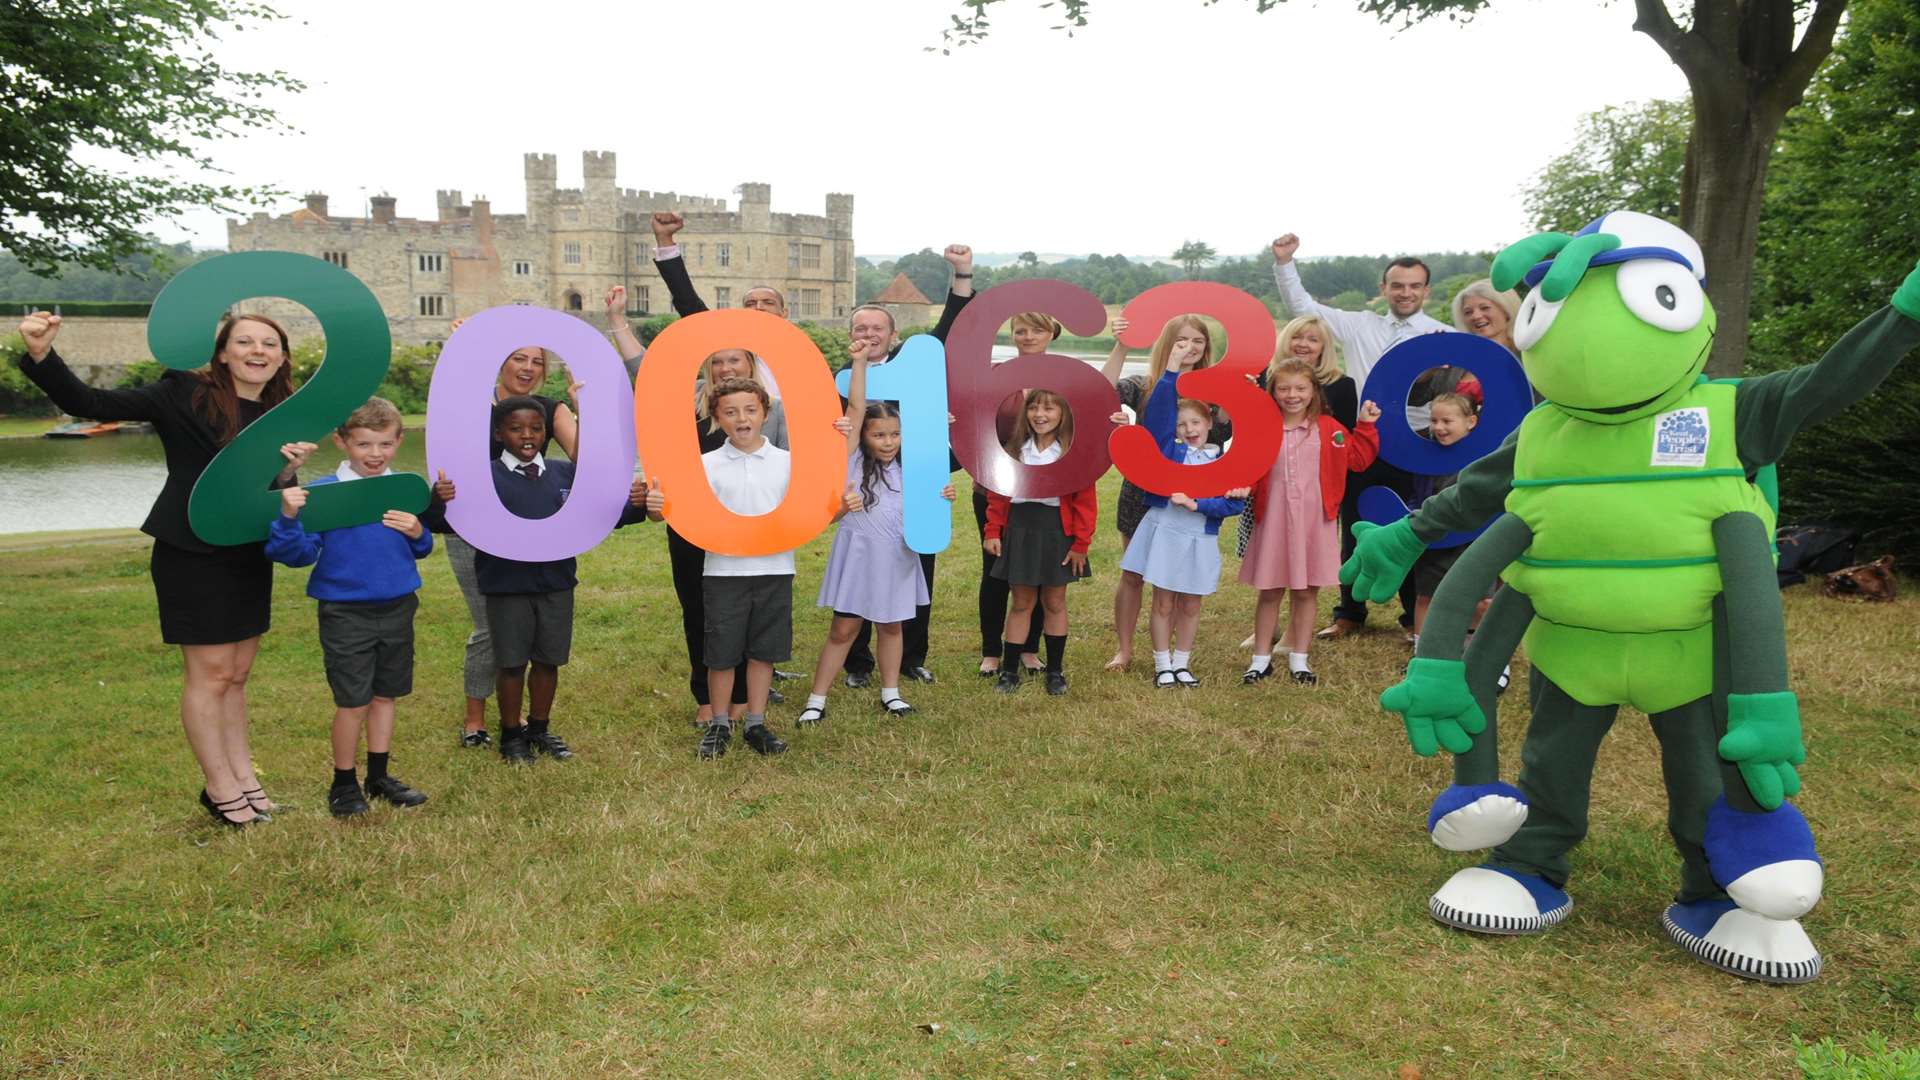 Schools taking part in Buster's Book Club announce 2,001,639 minutes of home reading achieved during celebrations at Leeds Castle.